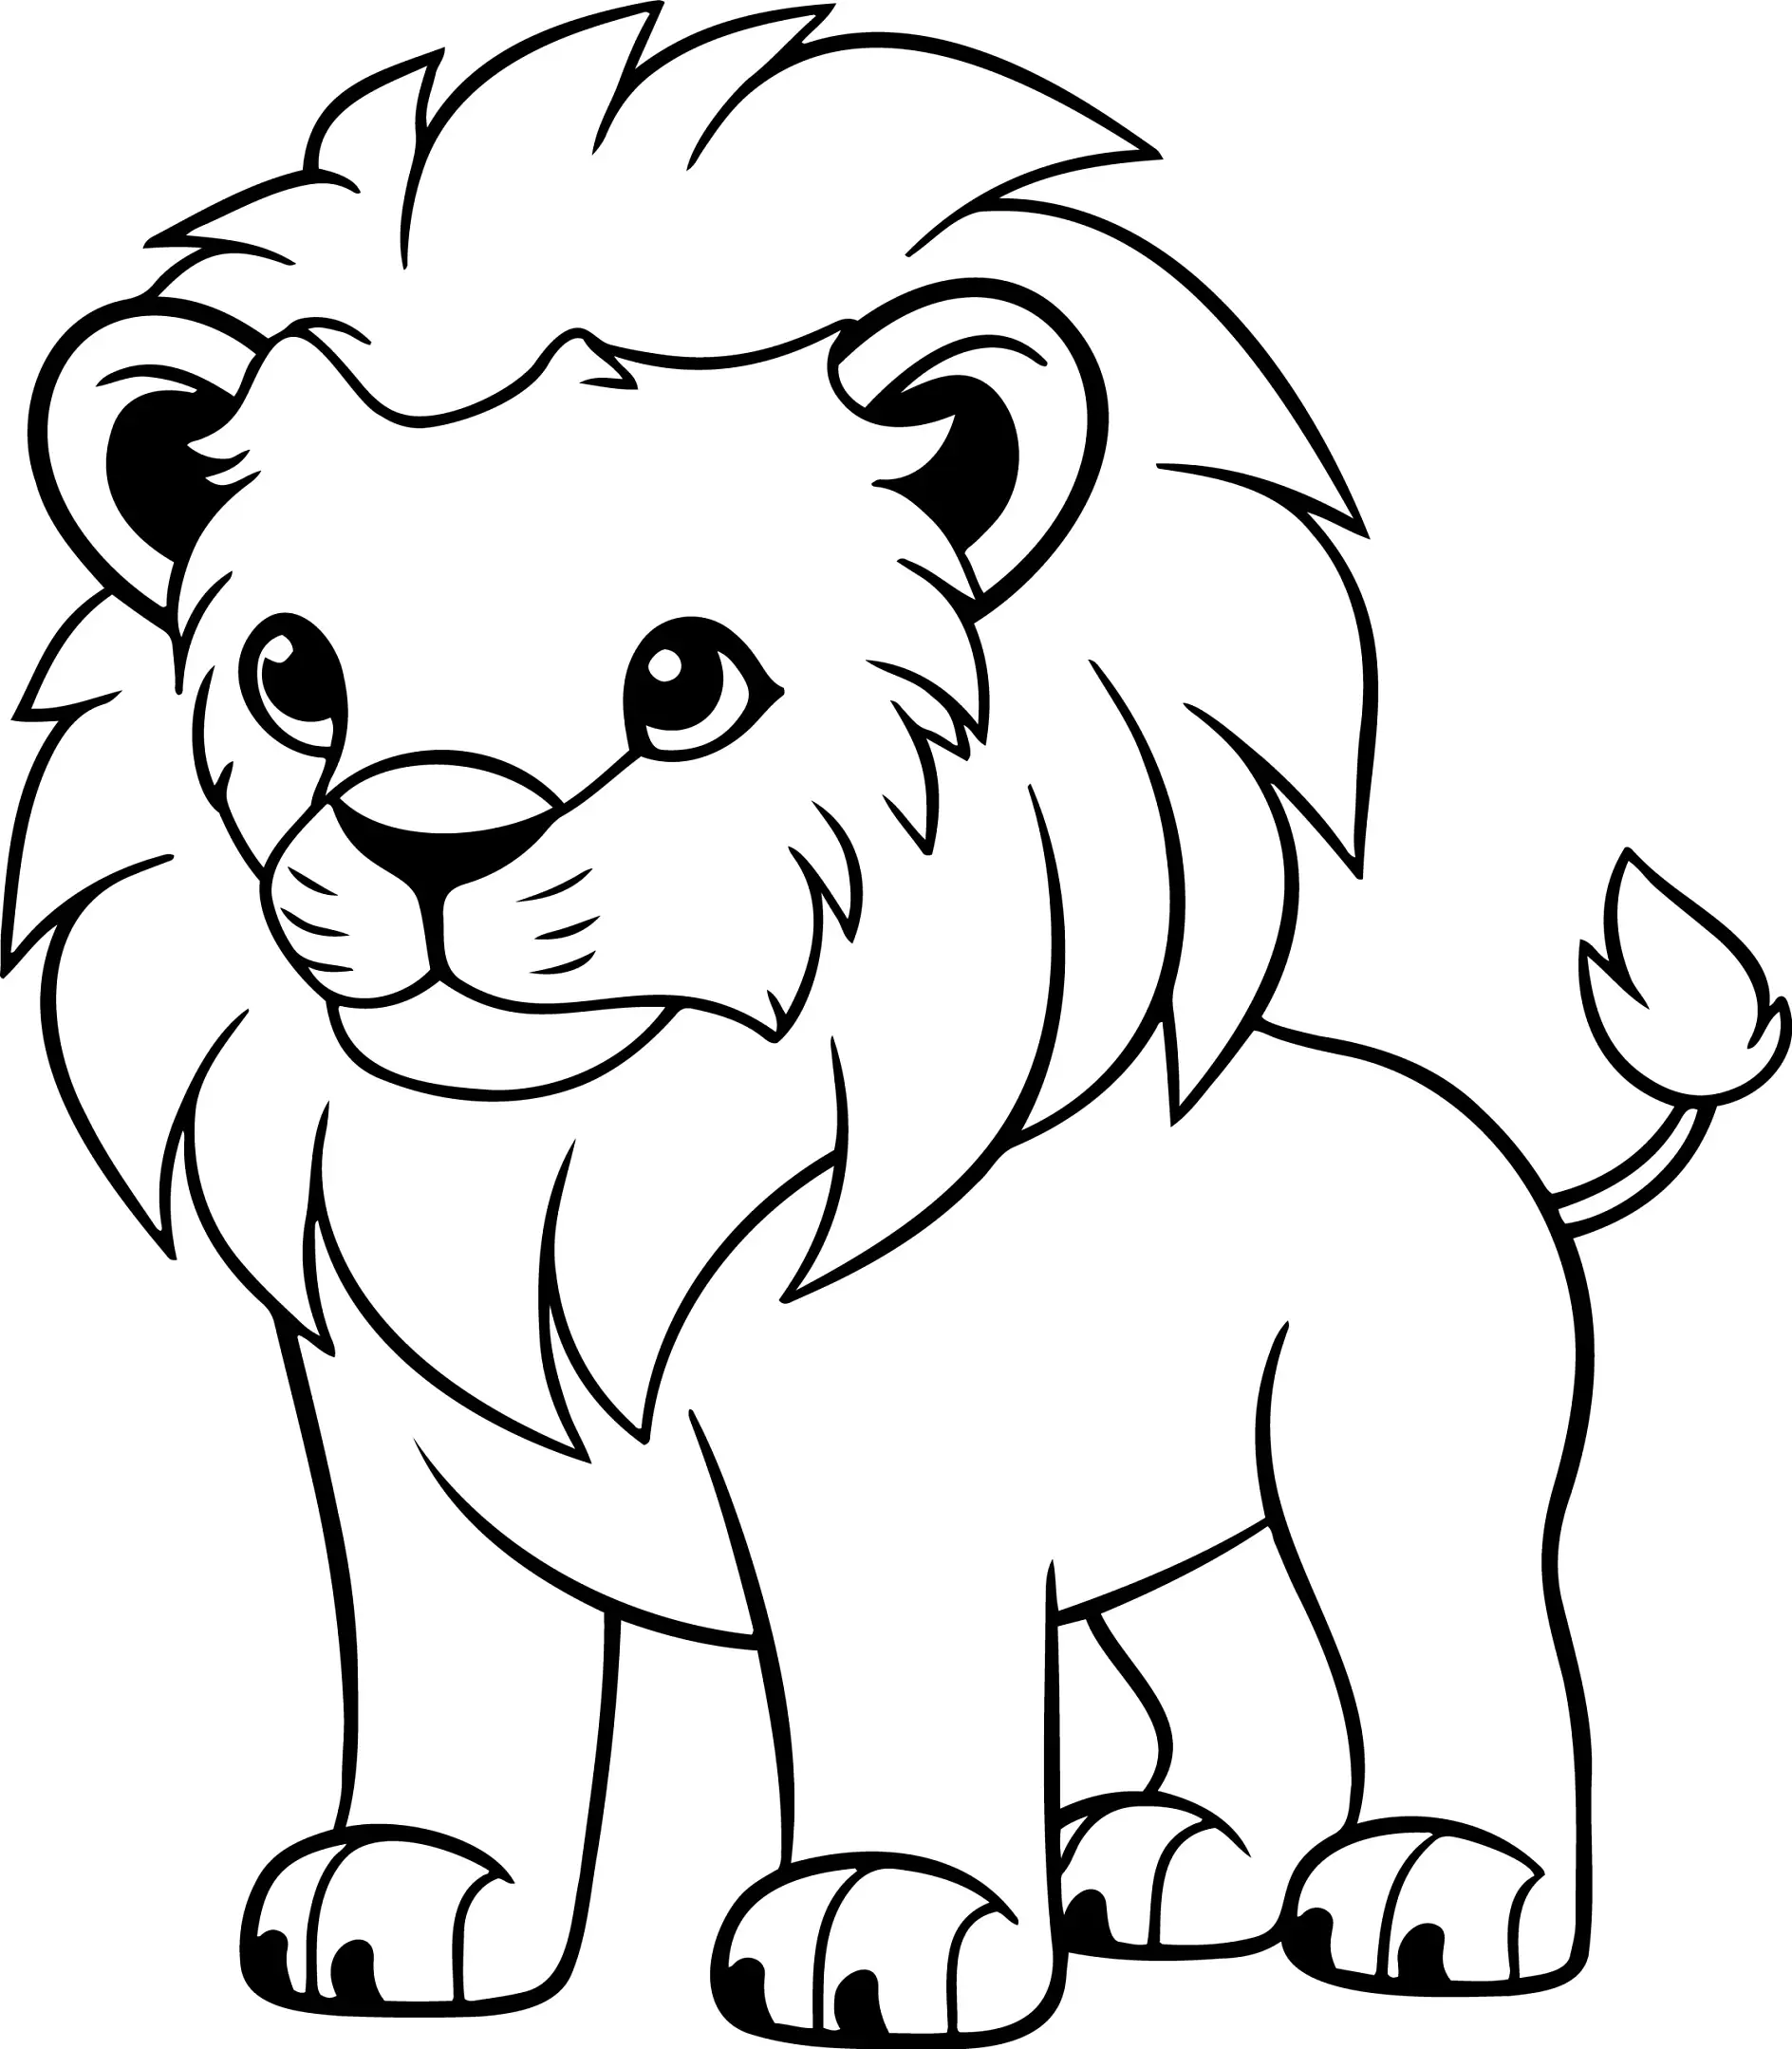 Ausmalbild Löwe stehend seitliche PoseLion vector illustration. Black and white outline Lion coloring book or page for children